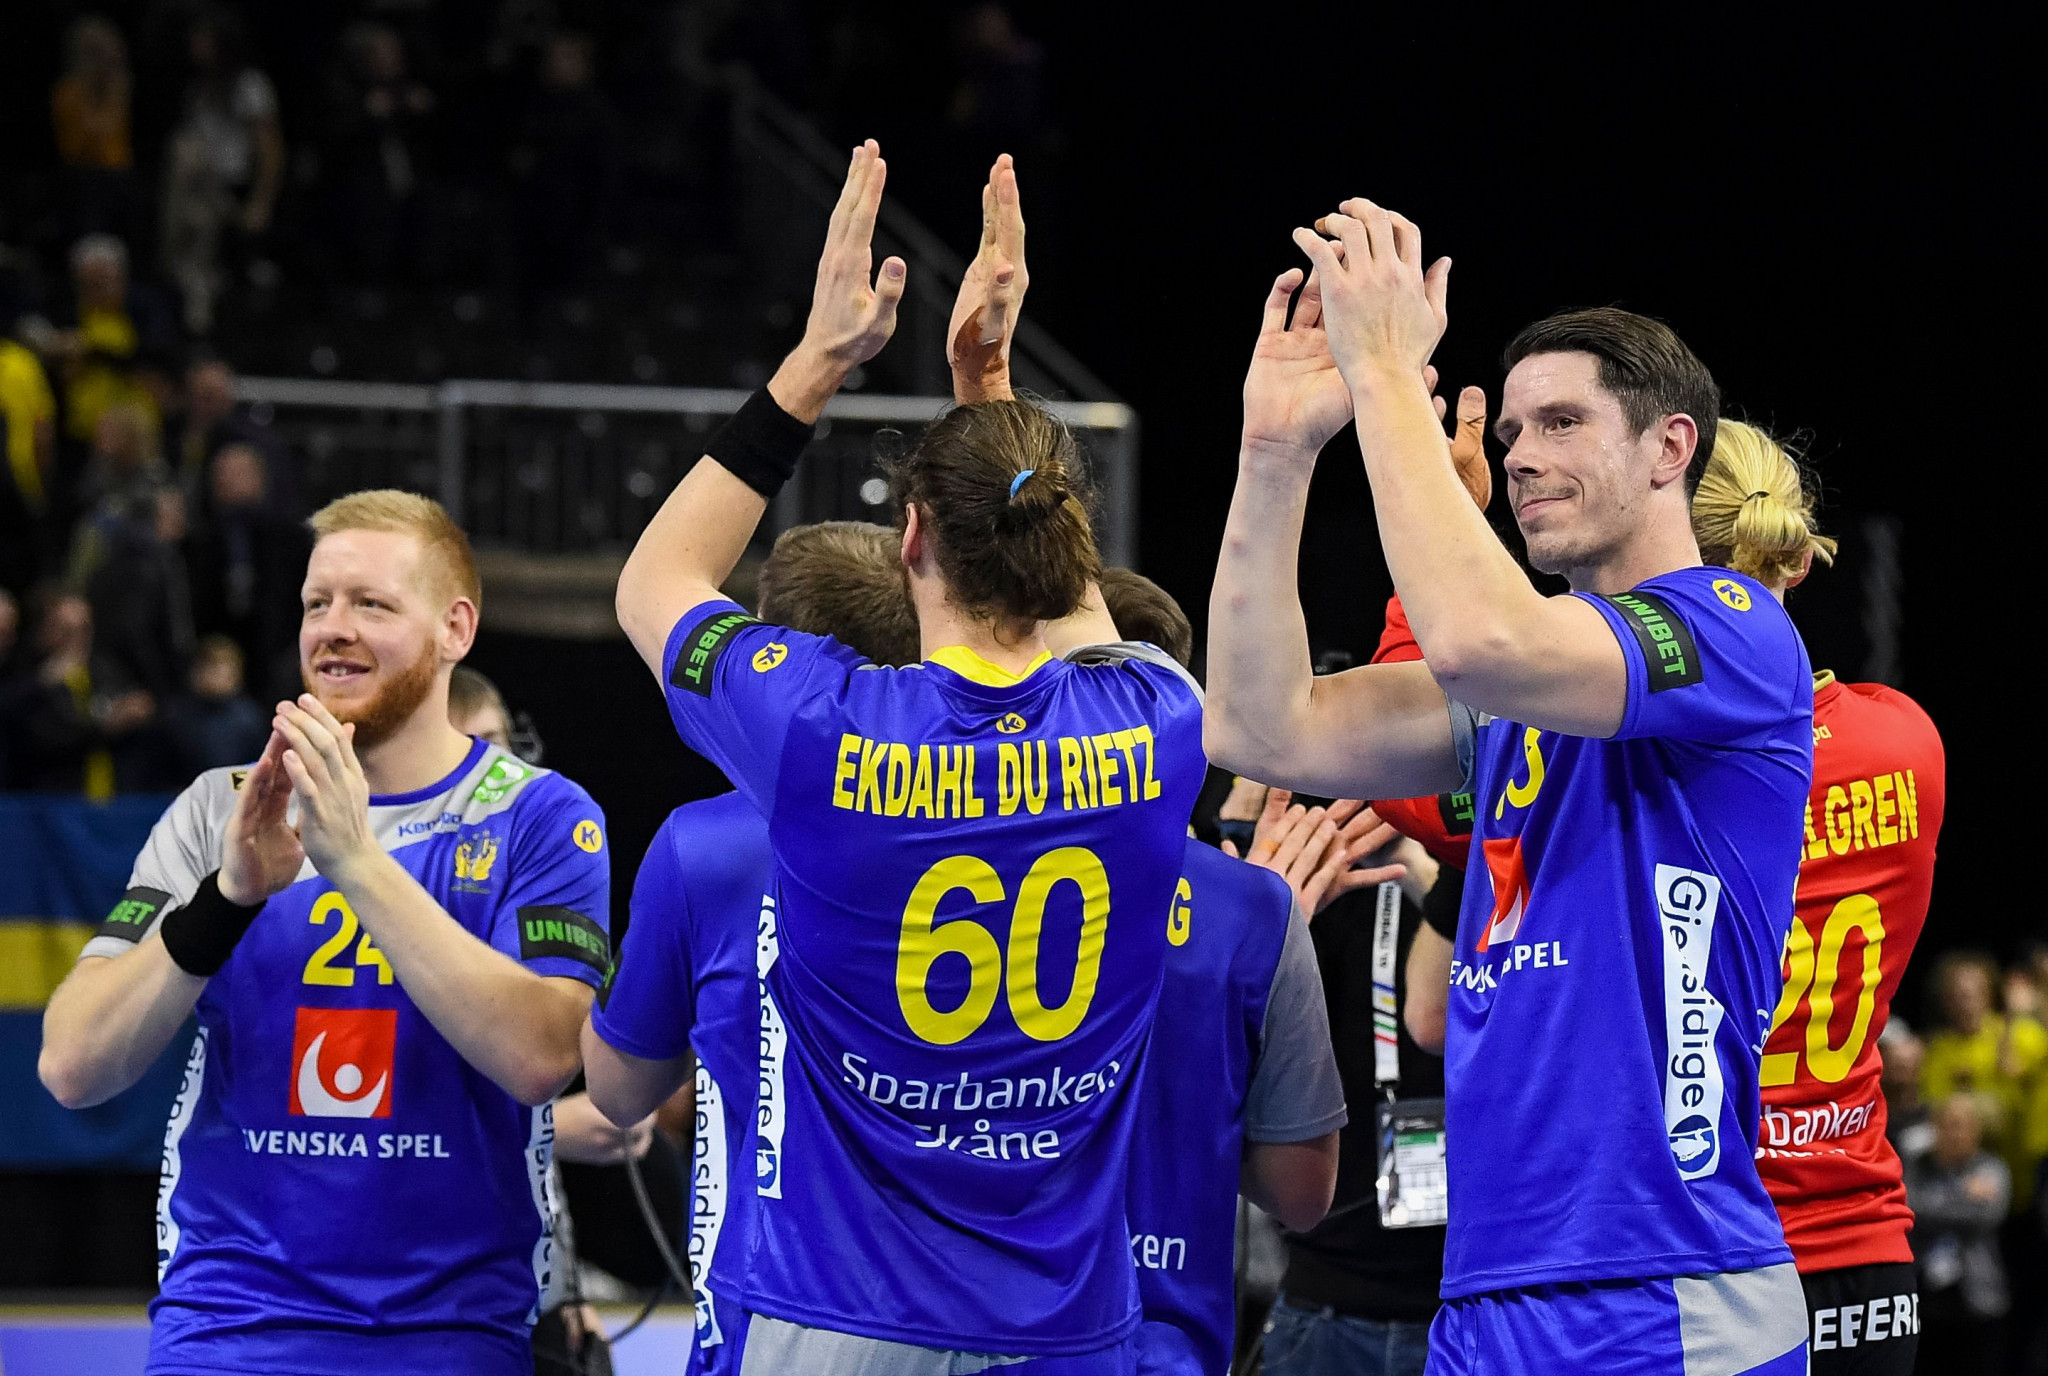 Sweden celebrate getting two wins in two at the IHF Men's Handball World Championships ©Getty Images